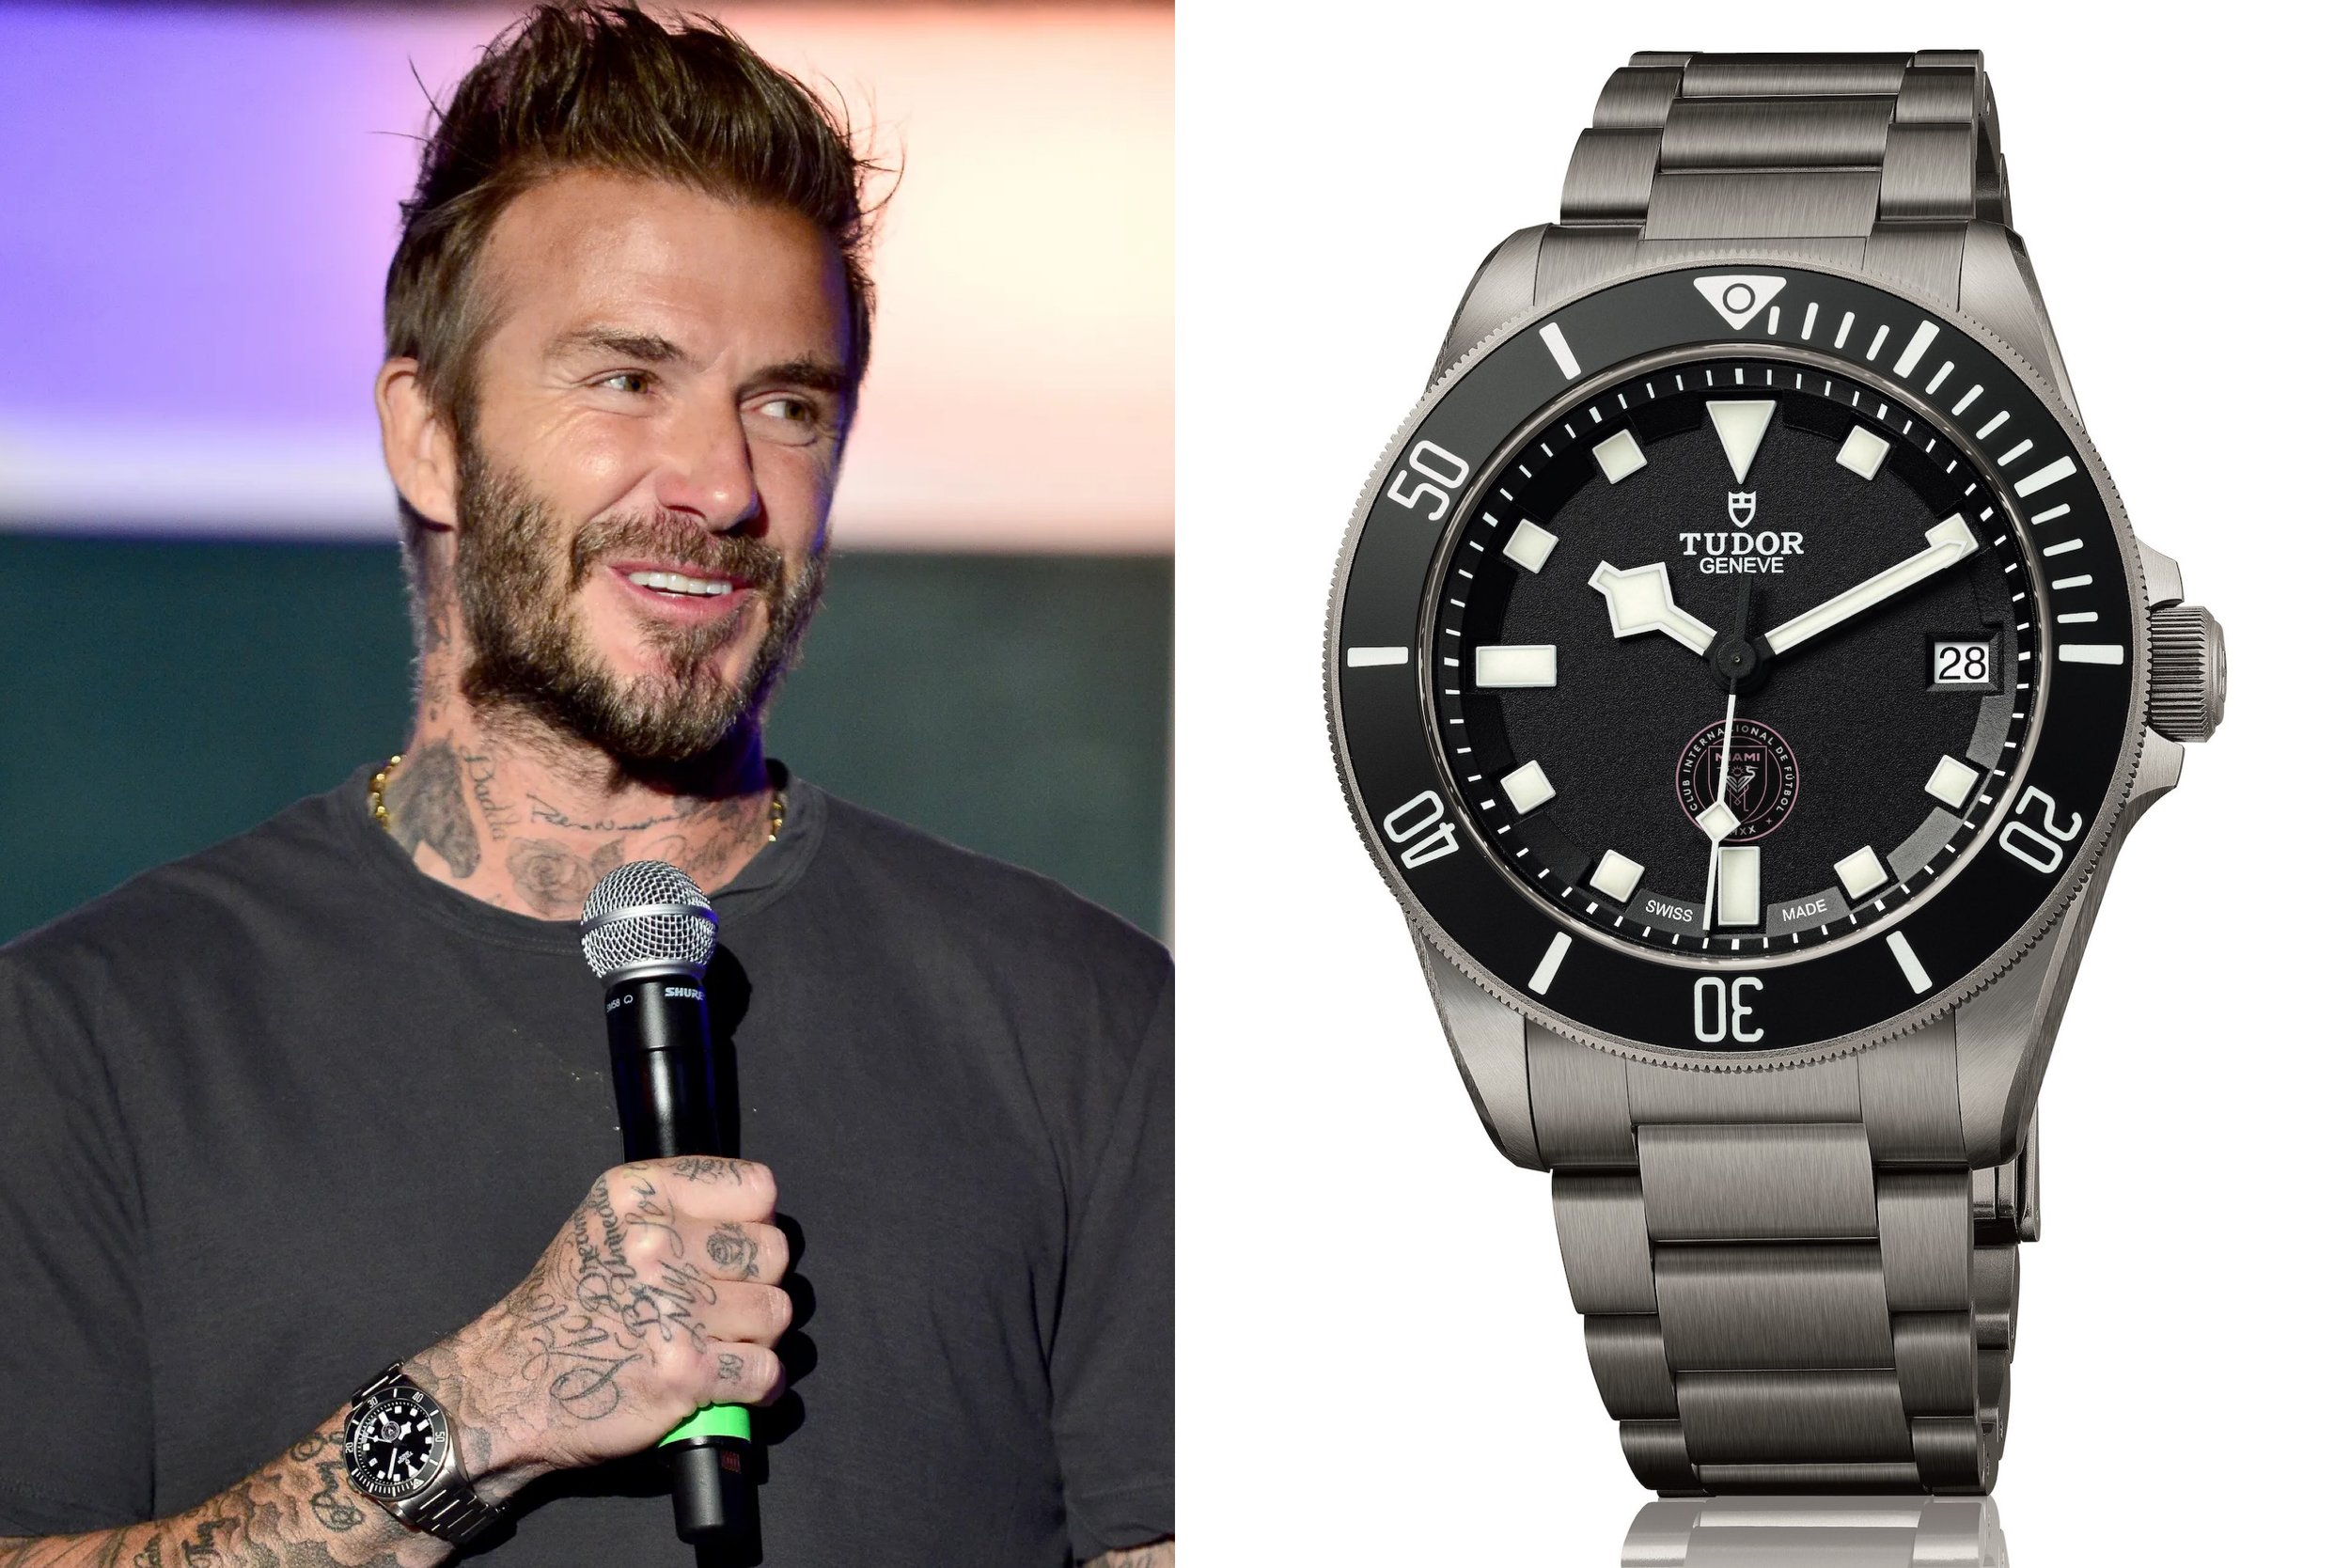 The most interesting watches in David Beckham's collection